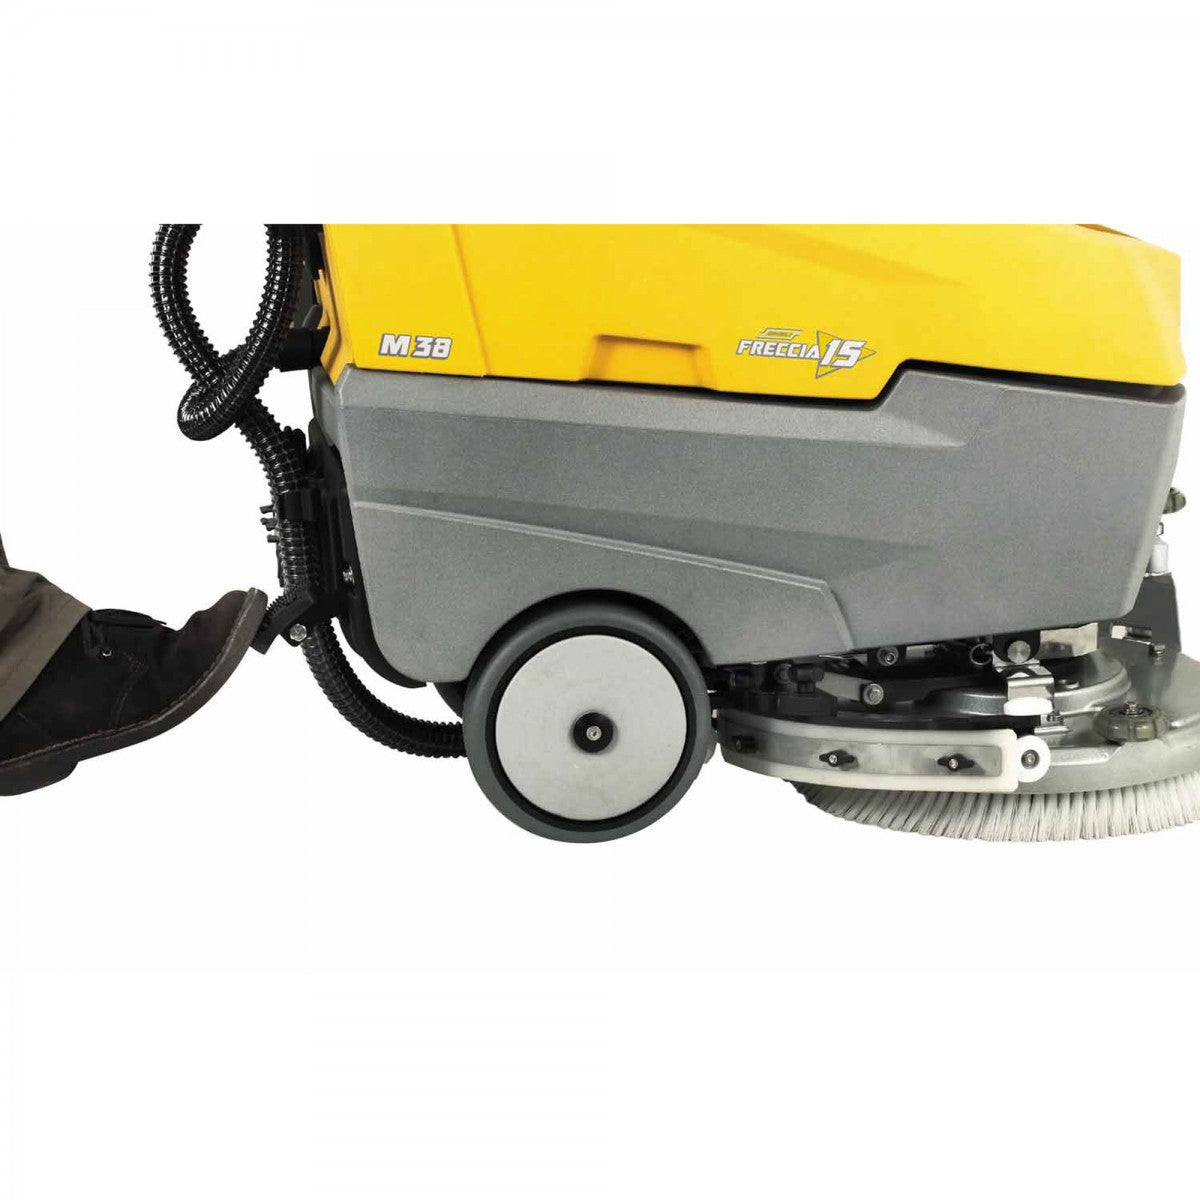 Autoscrubber - Ghibli 15" - Electric (50' Electric Cord) - Side View